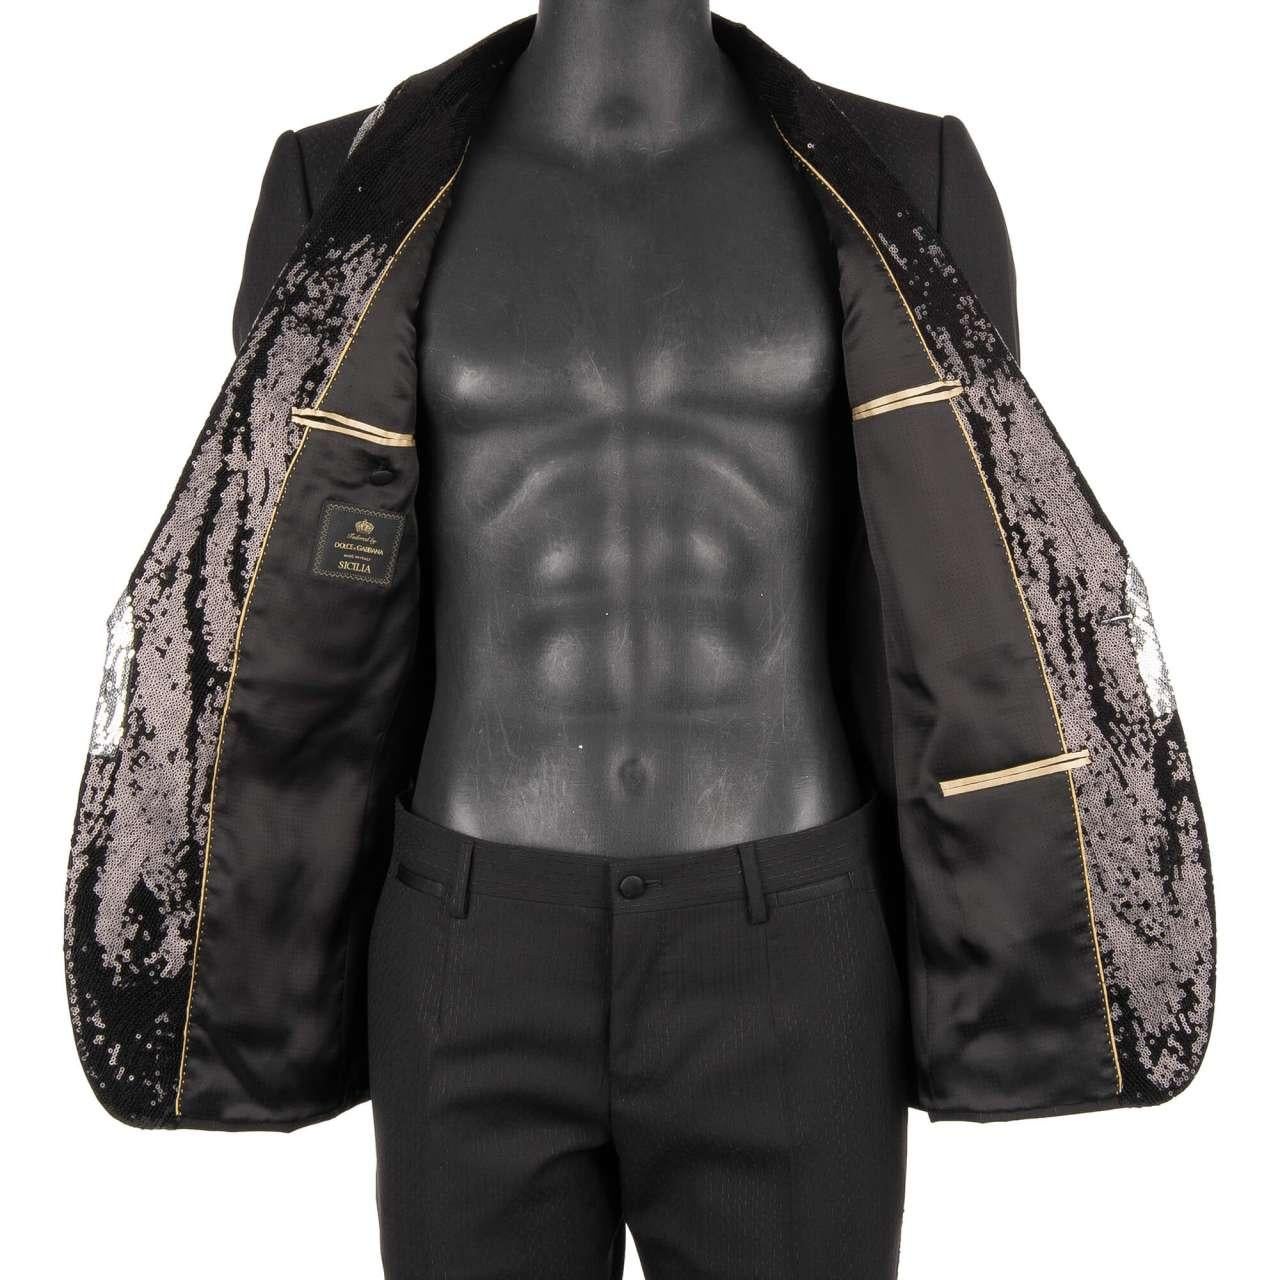 - Wool an Silk Blend suit with sequin embroidered shawl lapel in silver and black by DOLCE & GABBANA - SICILIA Model - RUNWAY - Dolce & Gabbana Fashion Show - New with tag - Former RRP: EUR 2,950 - MADE in ITALY - Slim Fit - Model: